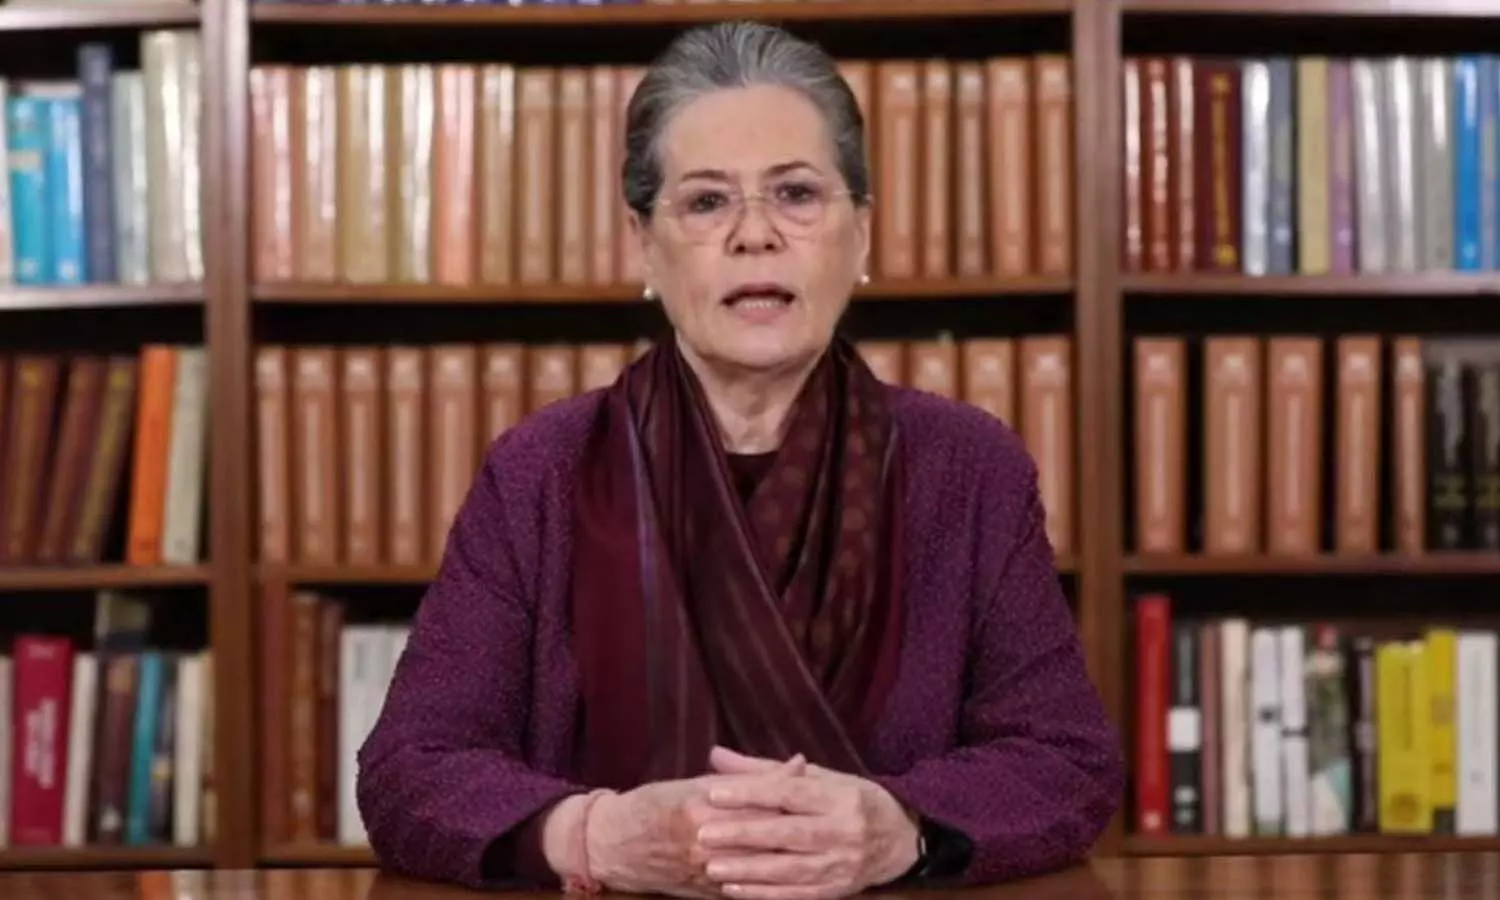 UP Election 2022: Sonia Gandhi worries about stronghold before voting in Rae Bareli, this special appeal to voters